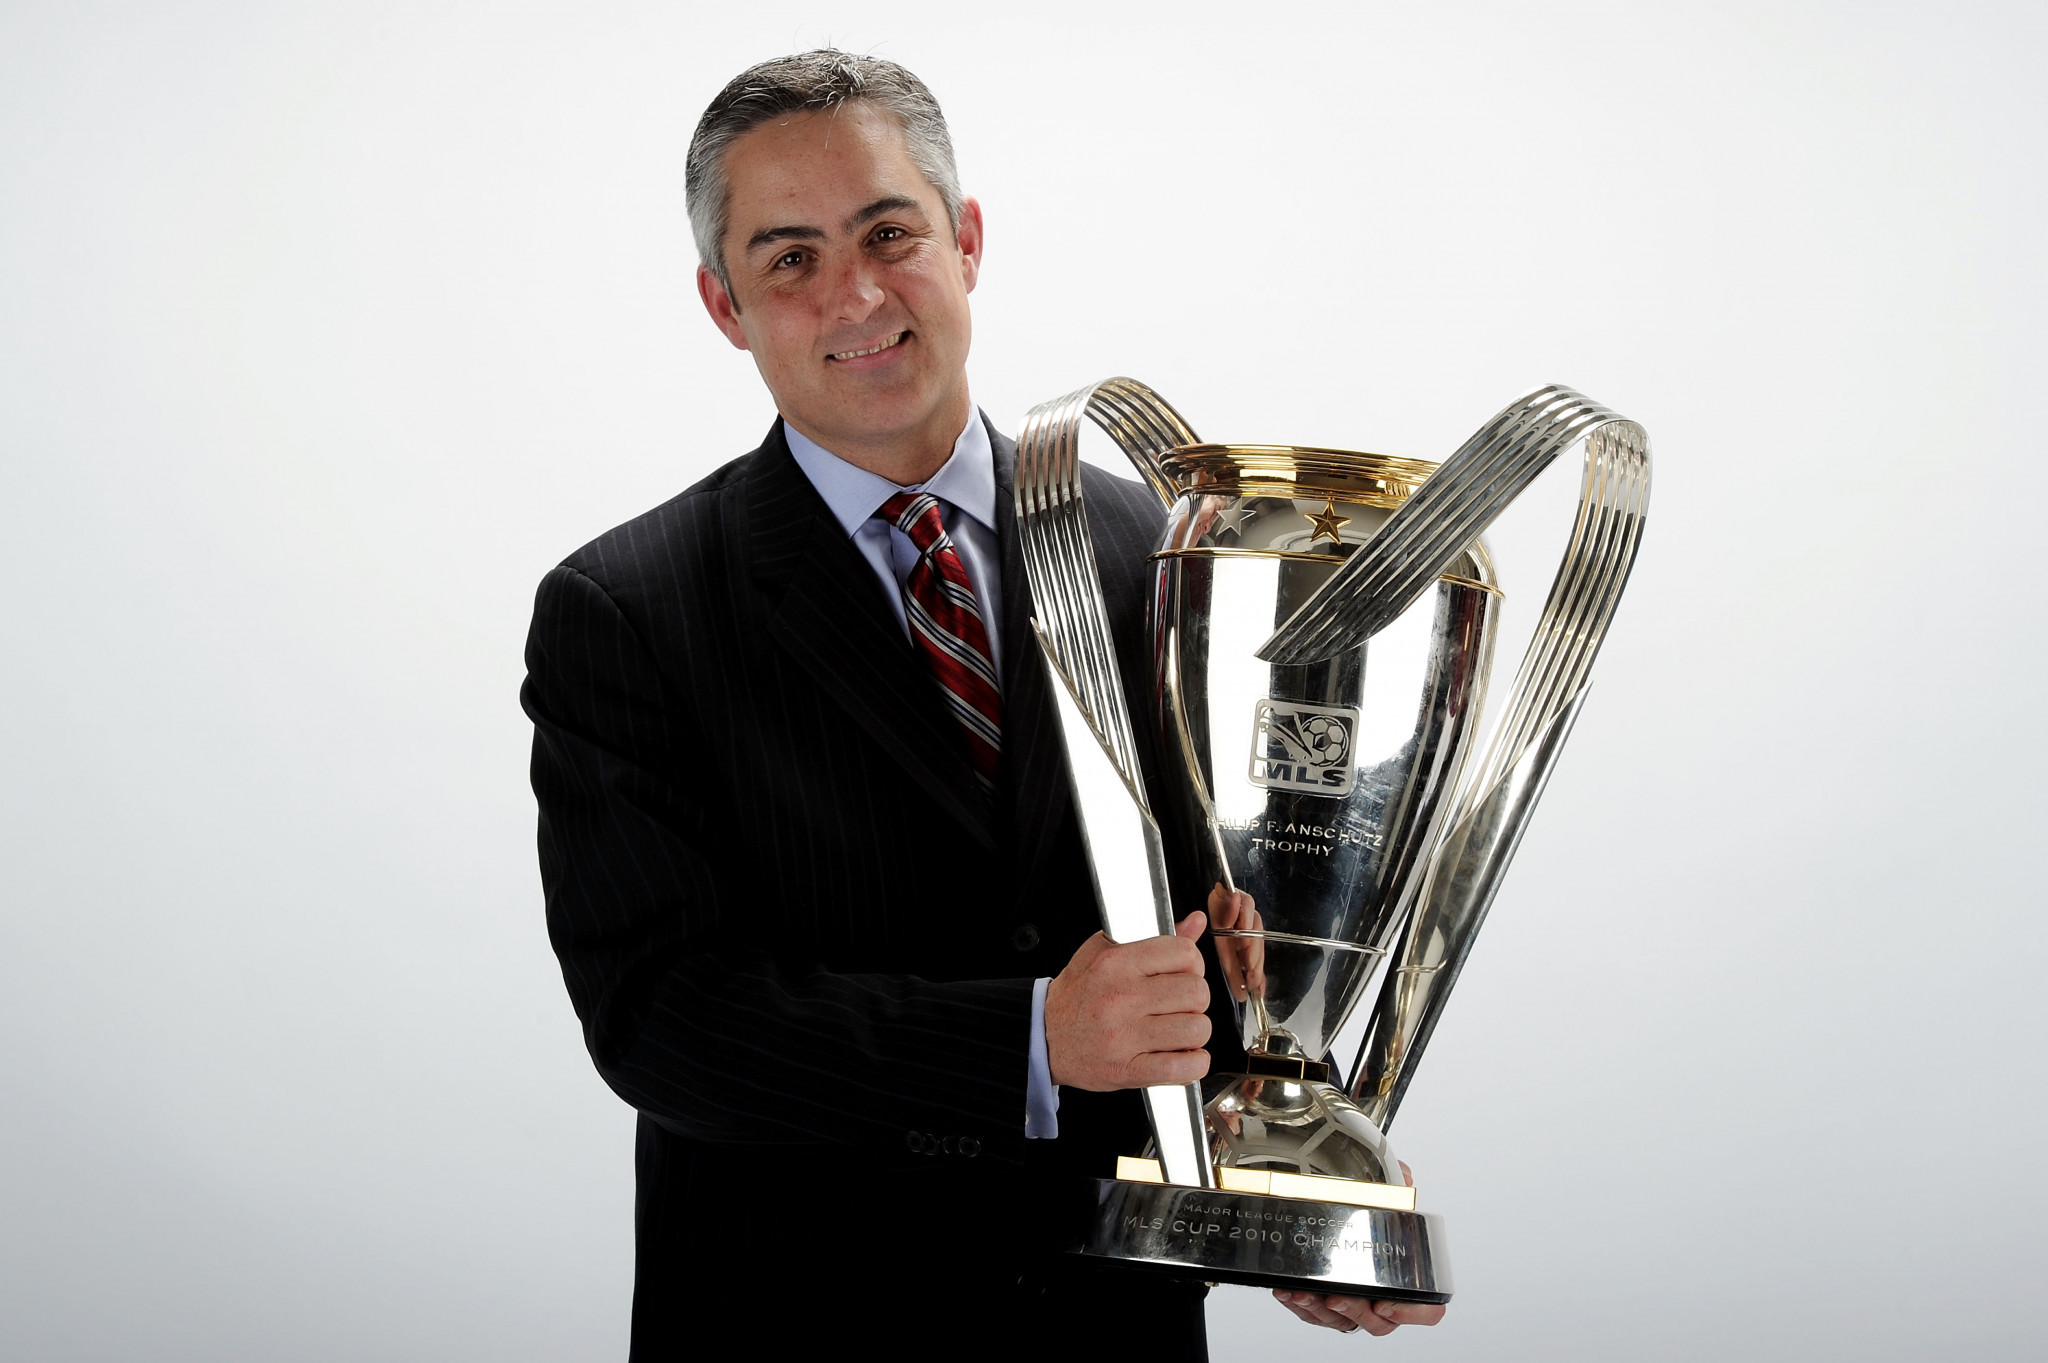 Jeff Plush poses with Colorado Rapids' MLS Cup in 2010 - he will now look to continue his success with USA Curling ©Getty Images